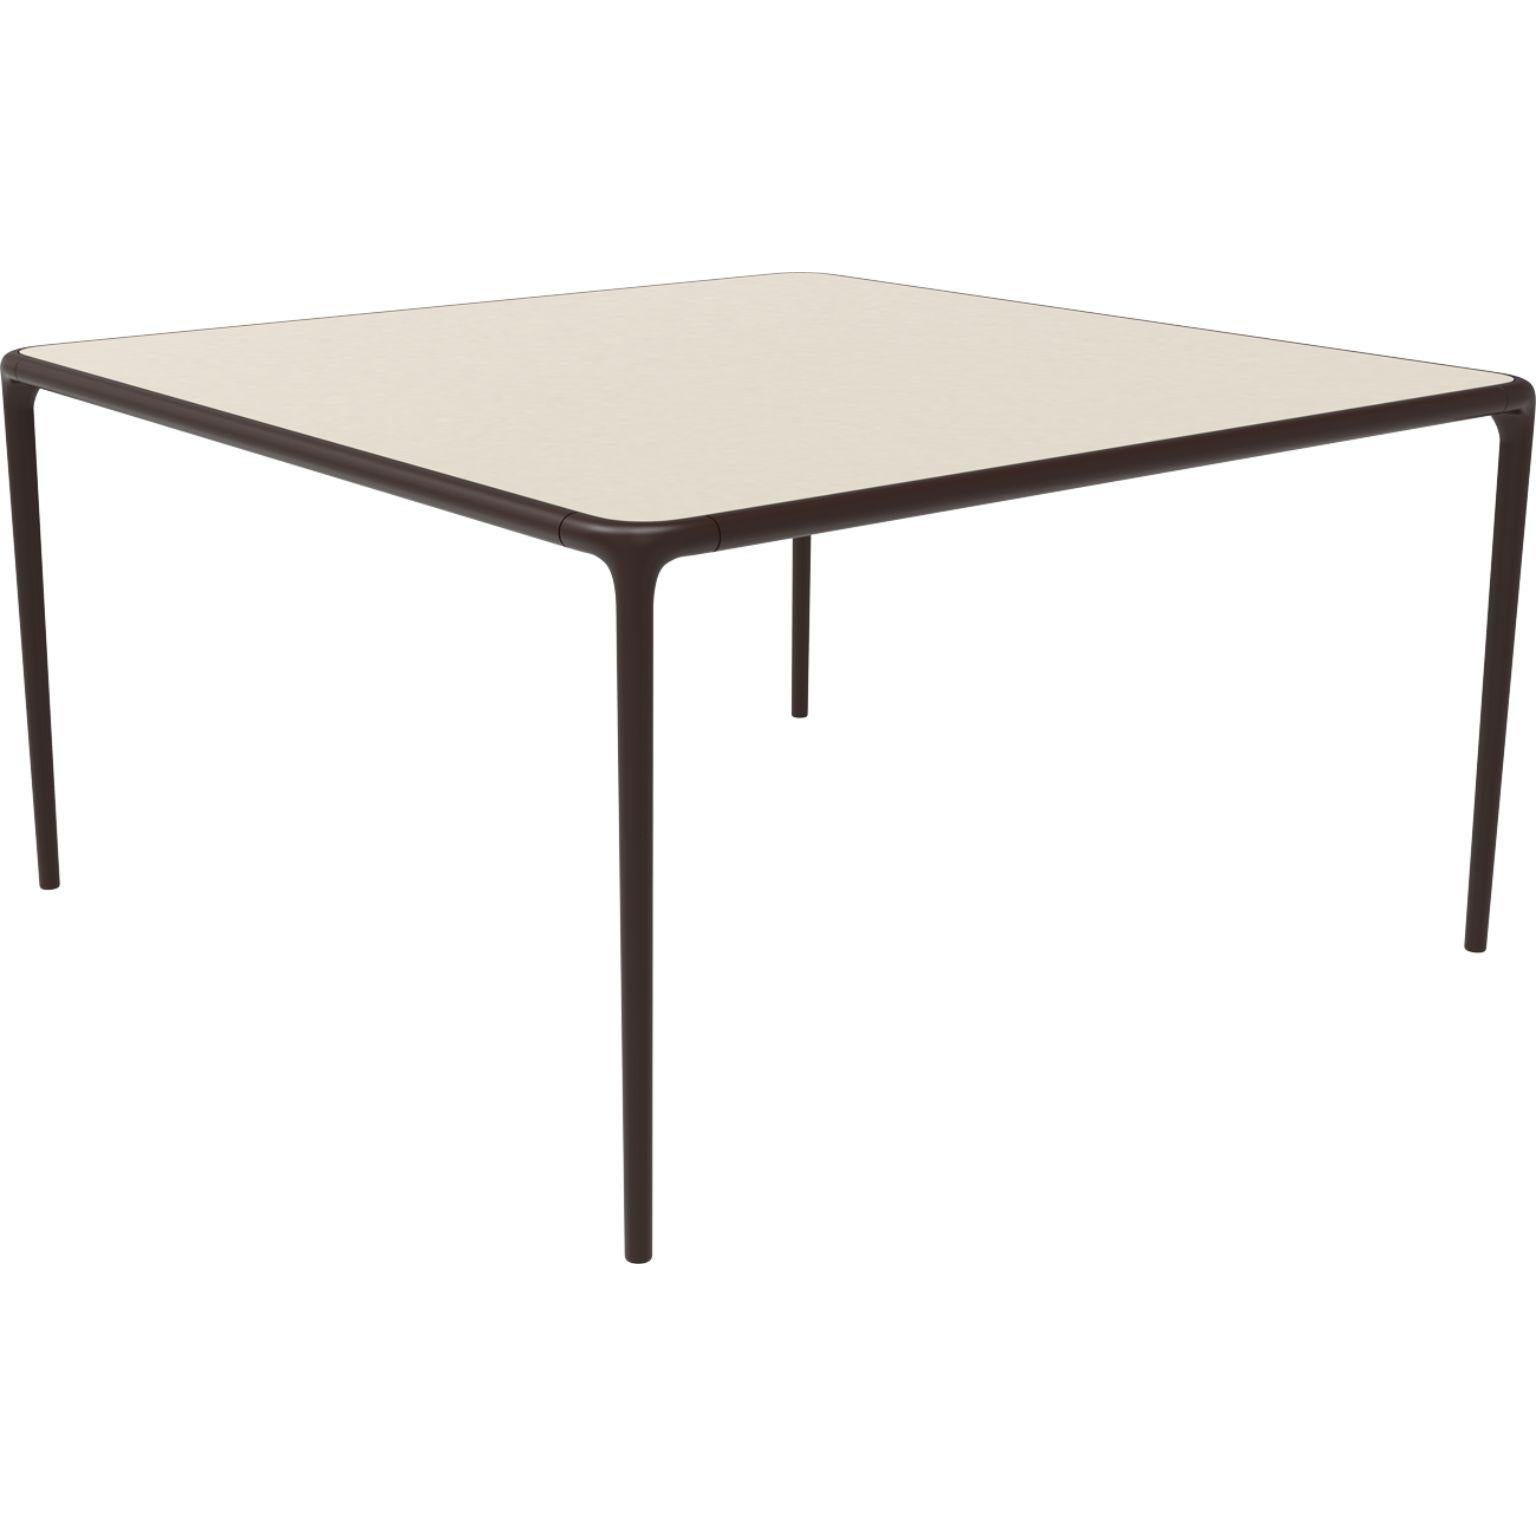 Xaloc chocolate glass top table 140 by Mowee.
Dimensions: D140 x W140 x H74 cm.
Material: Aluminum, tinted tempered glass top.
Also available in different aluminum colors and finishes (HPL Black Edge or Neolith).

Xaloc synthesizes the lines of